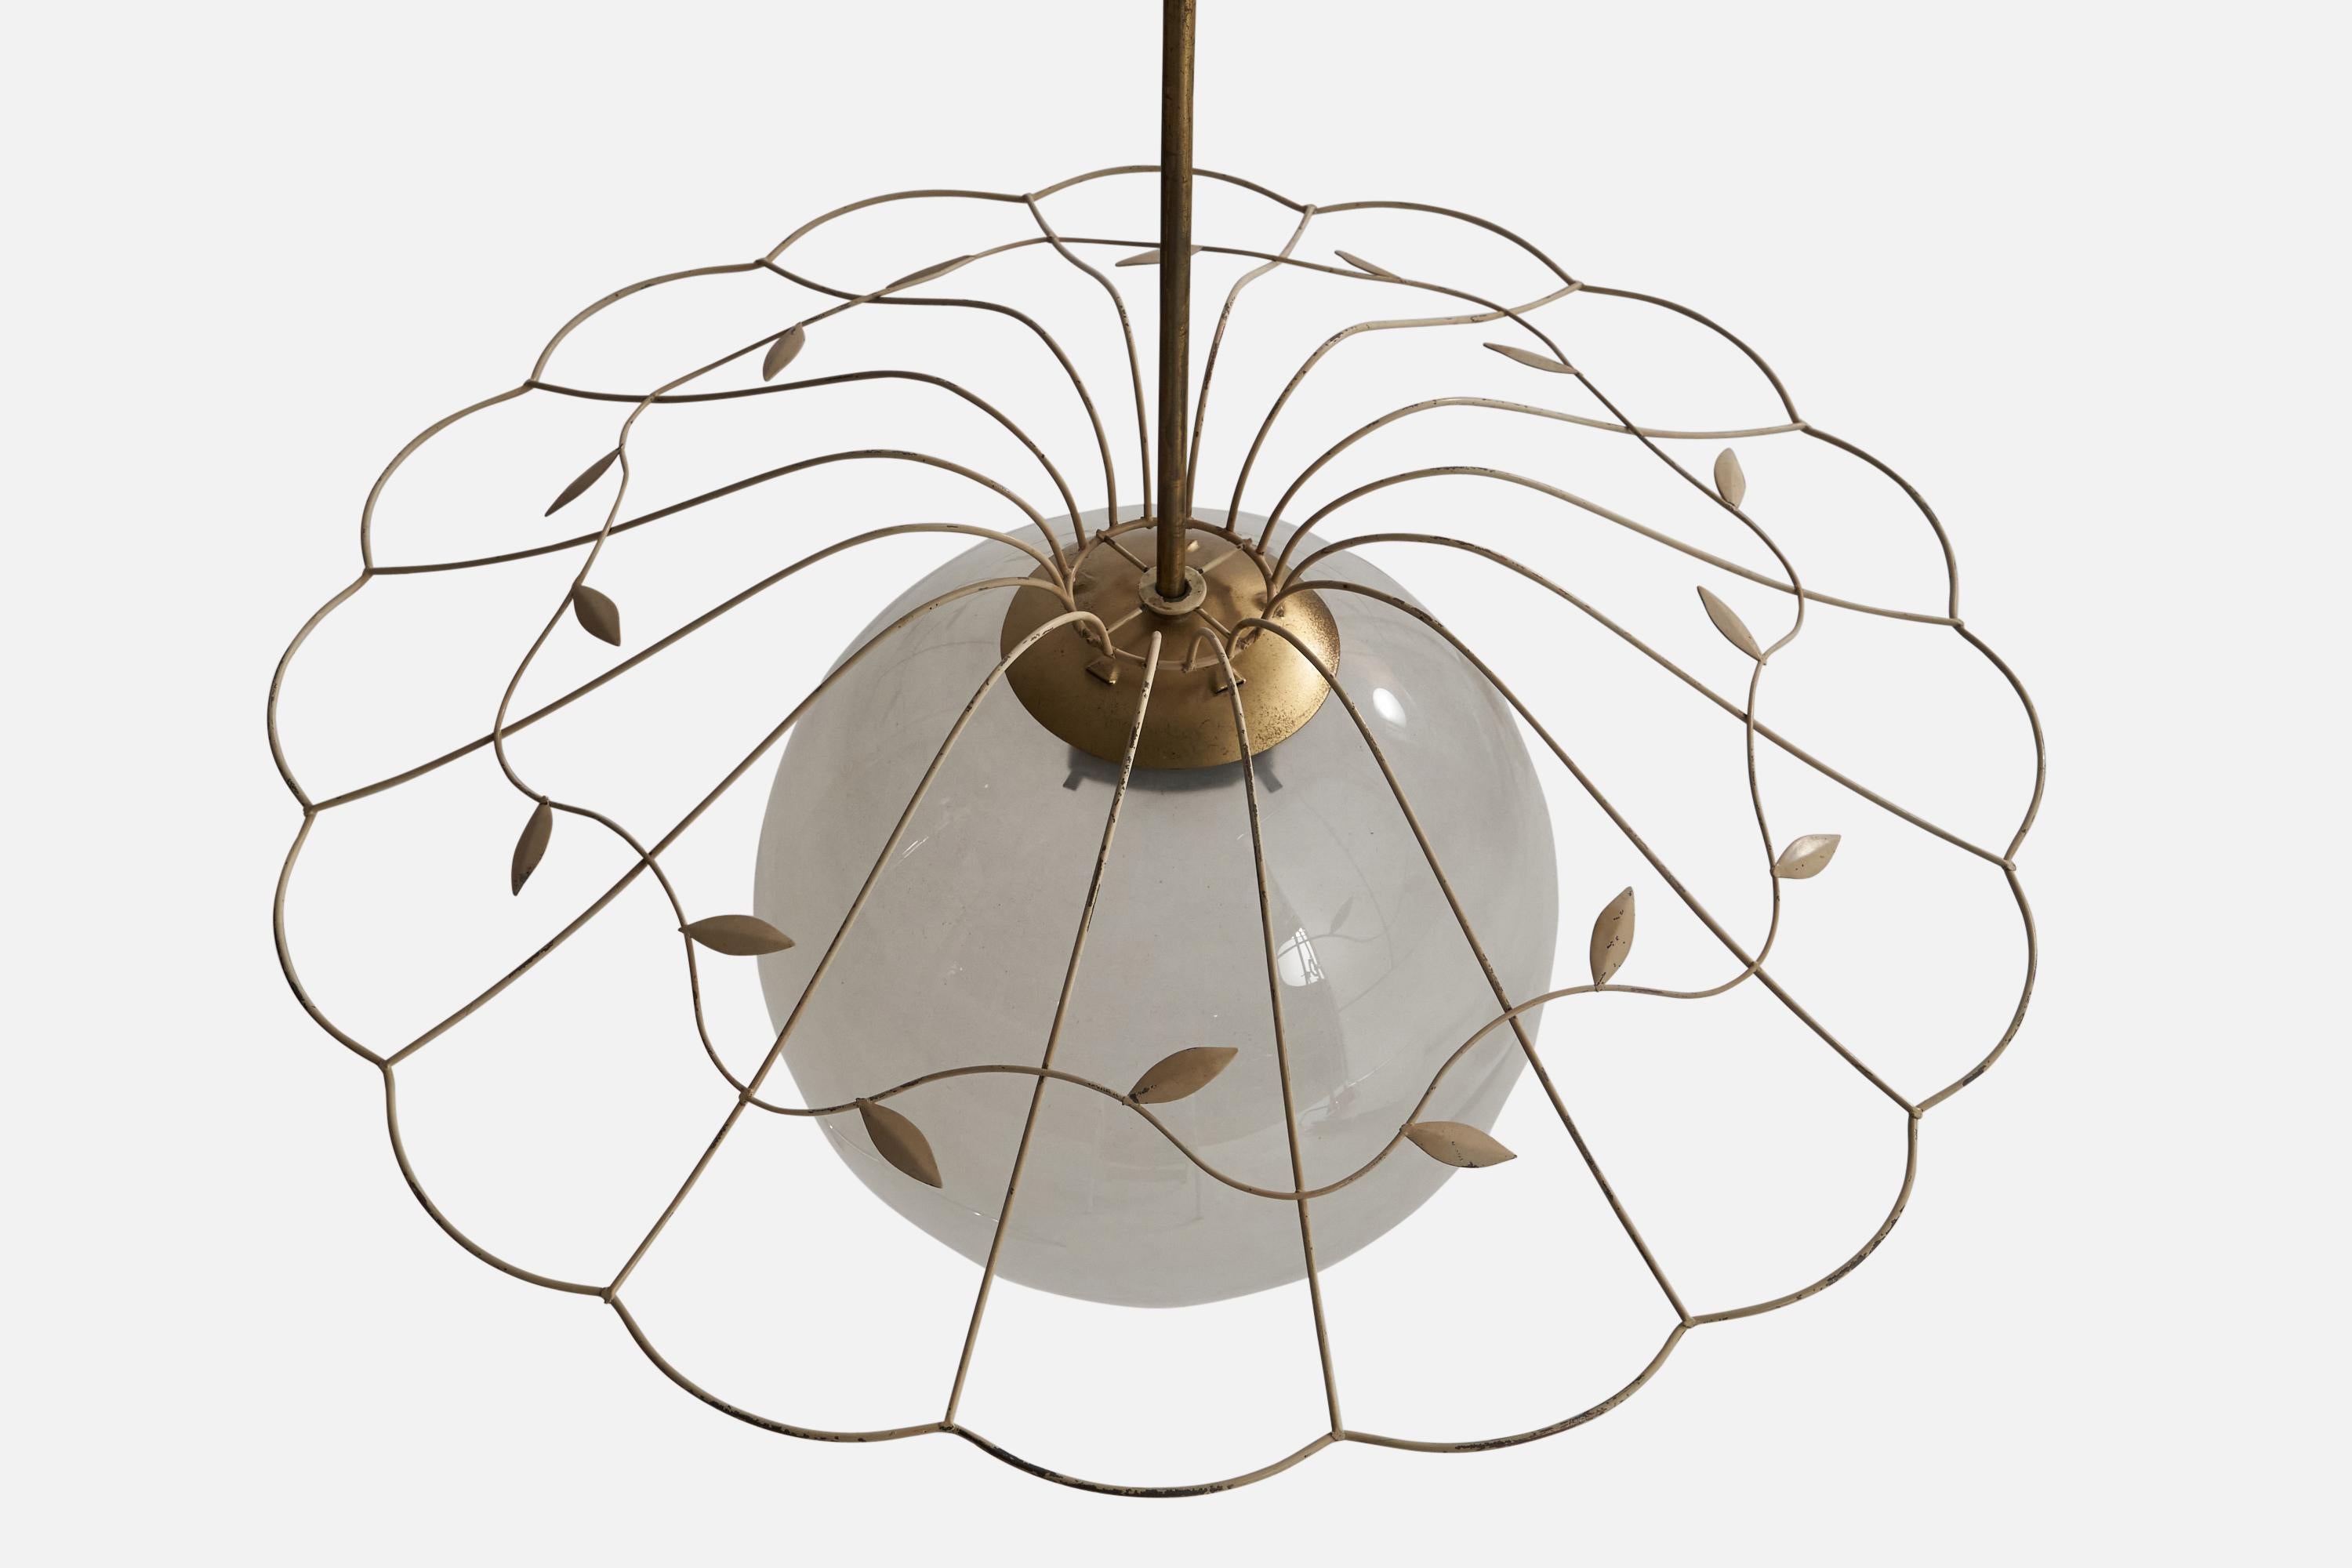 A brass, glass and cream-lacquered pendant light designed and produced in Sweden, 1940s.

Dimensions of canopy (inches): 2.32” H x 3.90” Diameter
Socket takes standard E-26 bulbs. 1 socket.There is no maximum wattage stated on the fixture. All